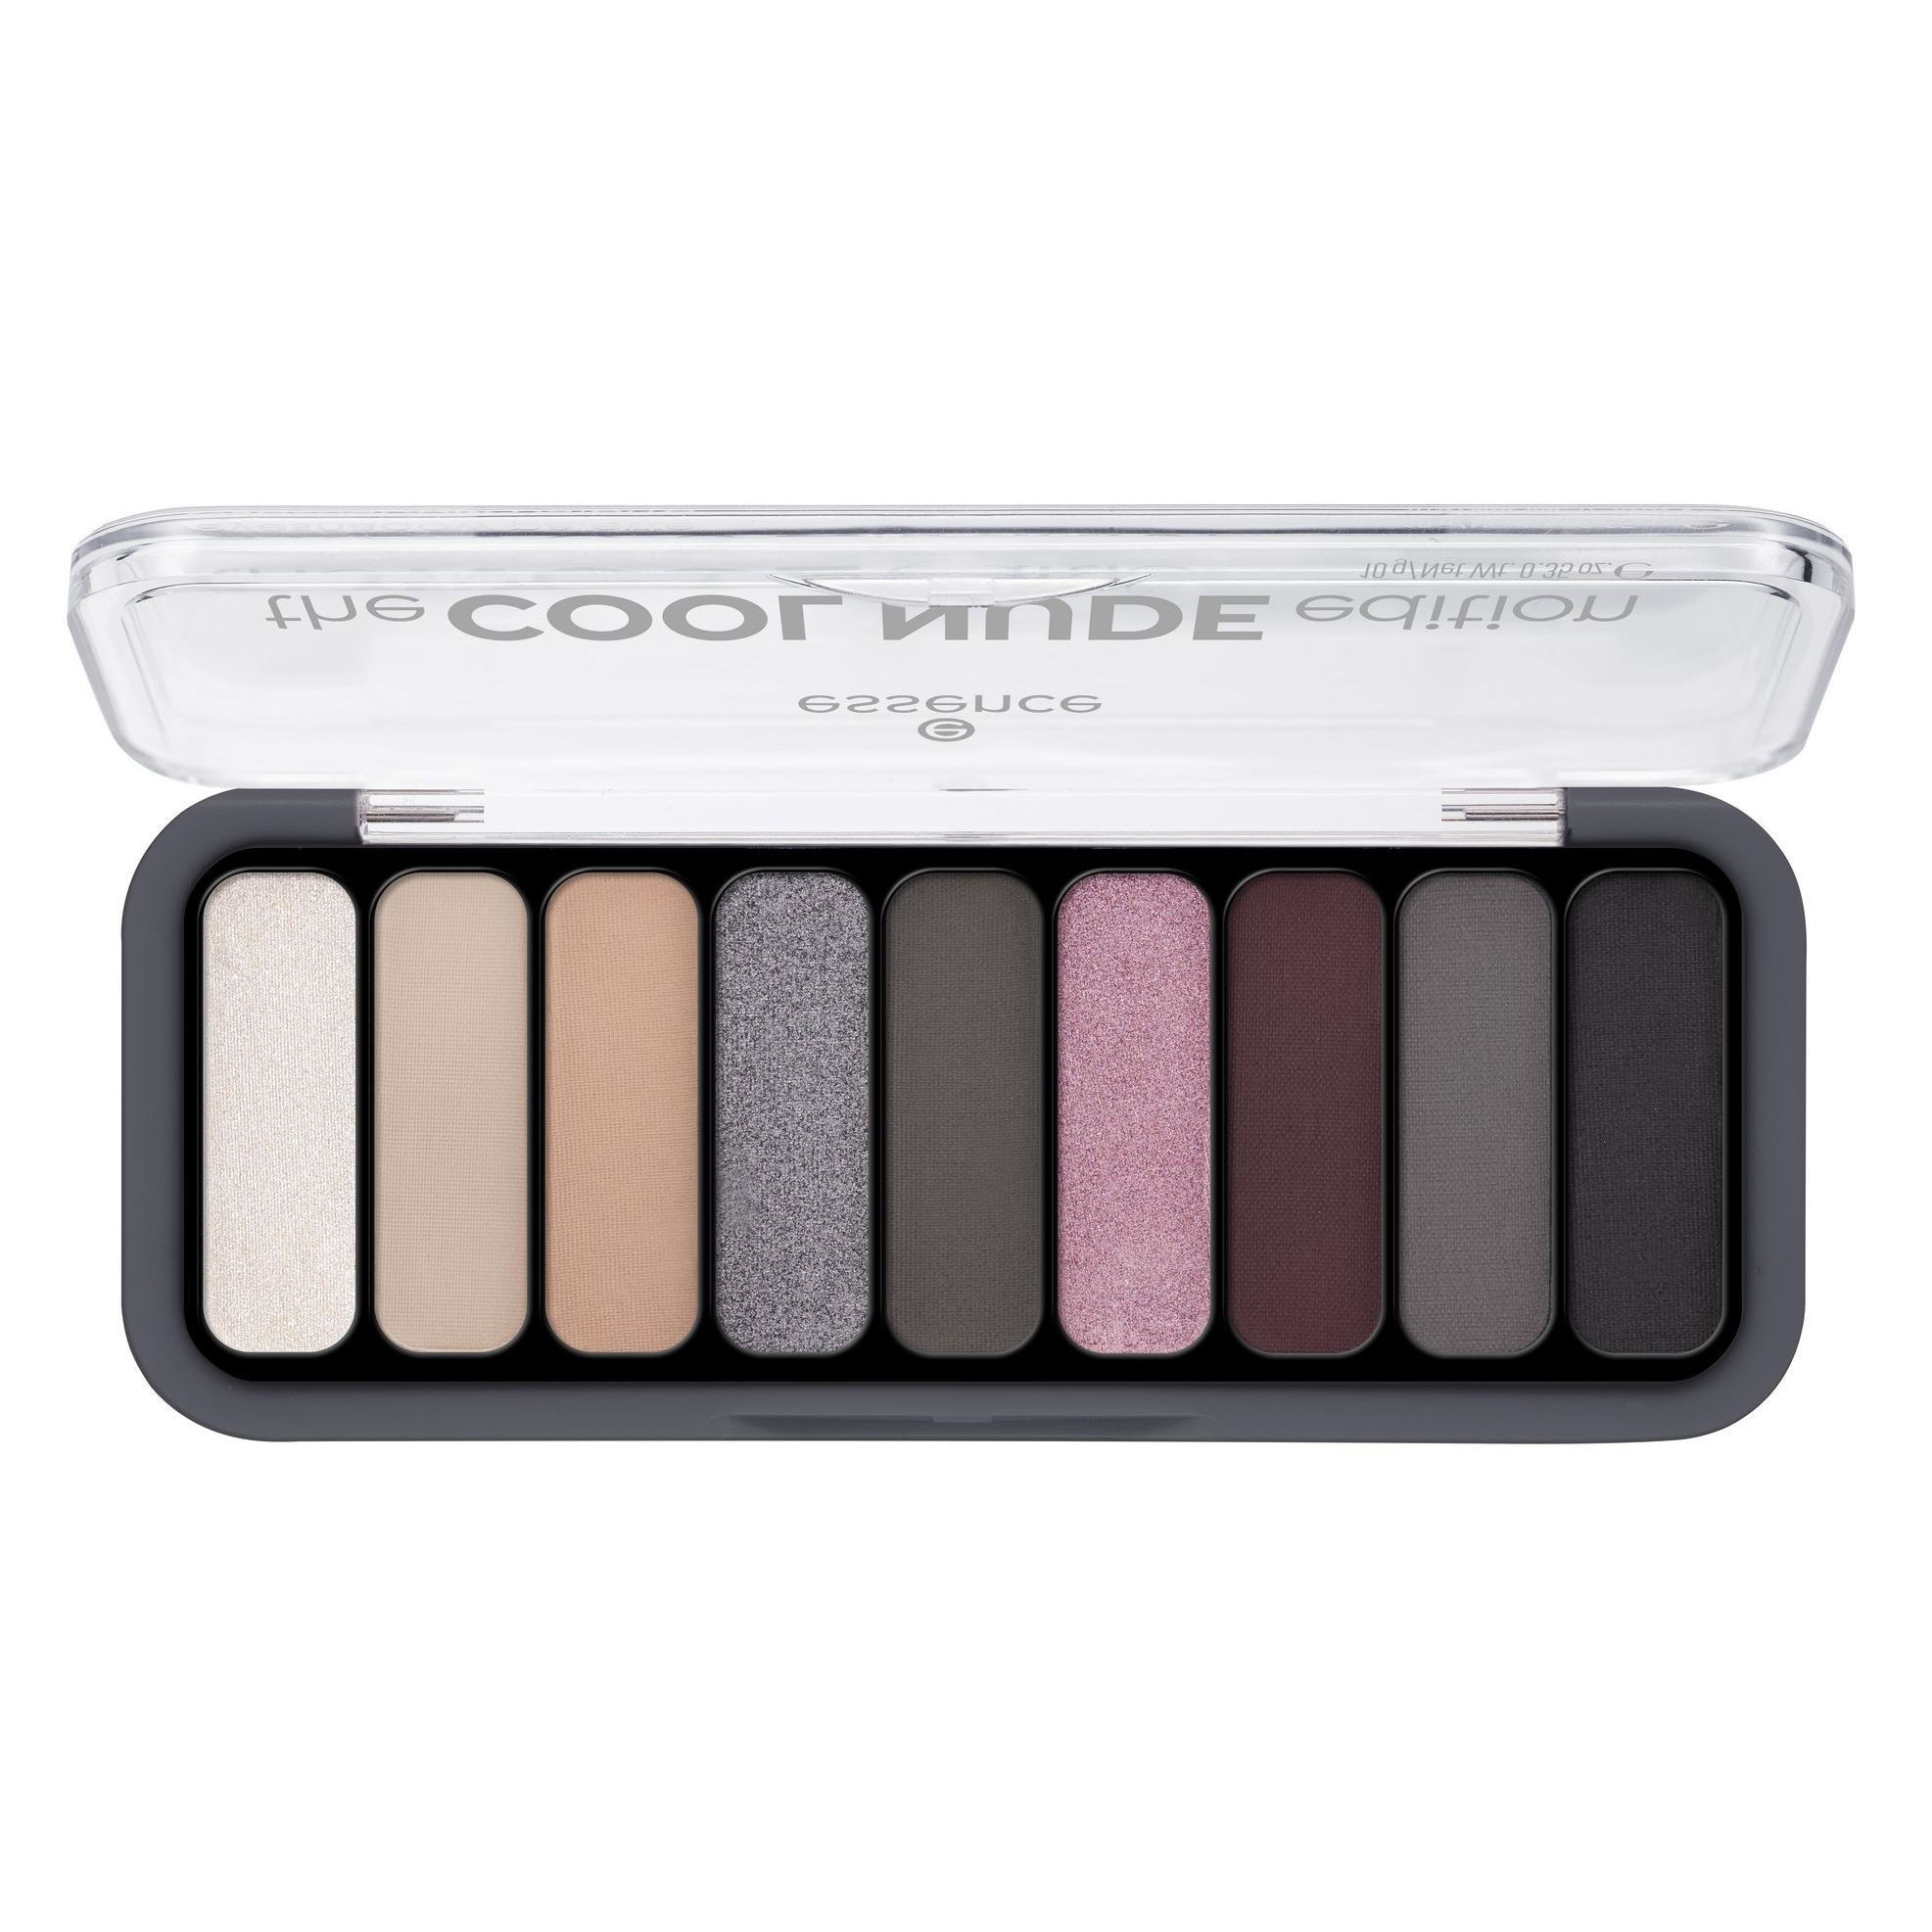 The Cool Nude Edition Eyeshadow Palette